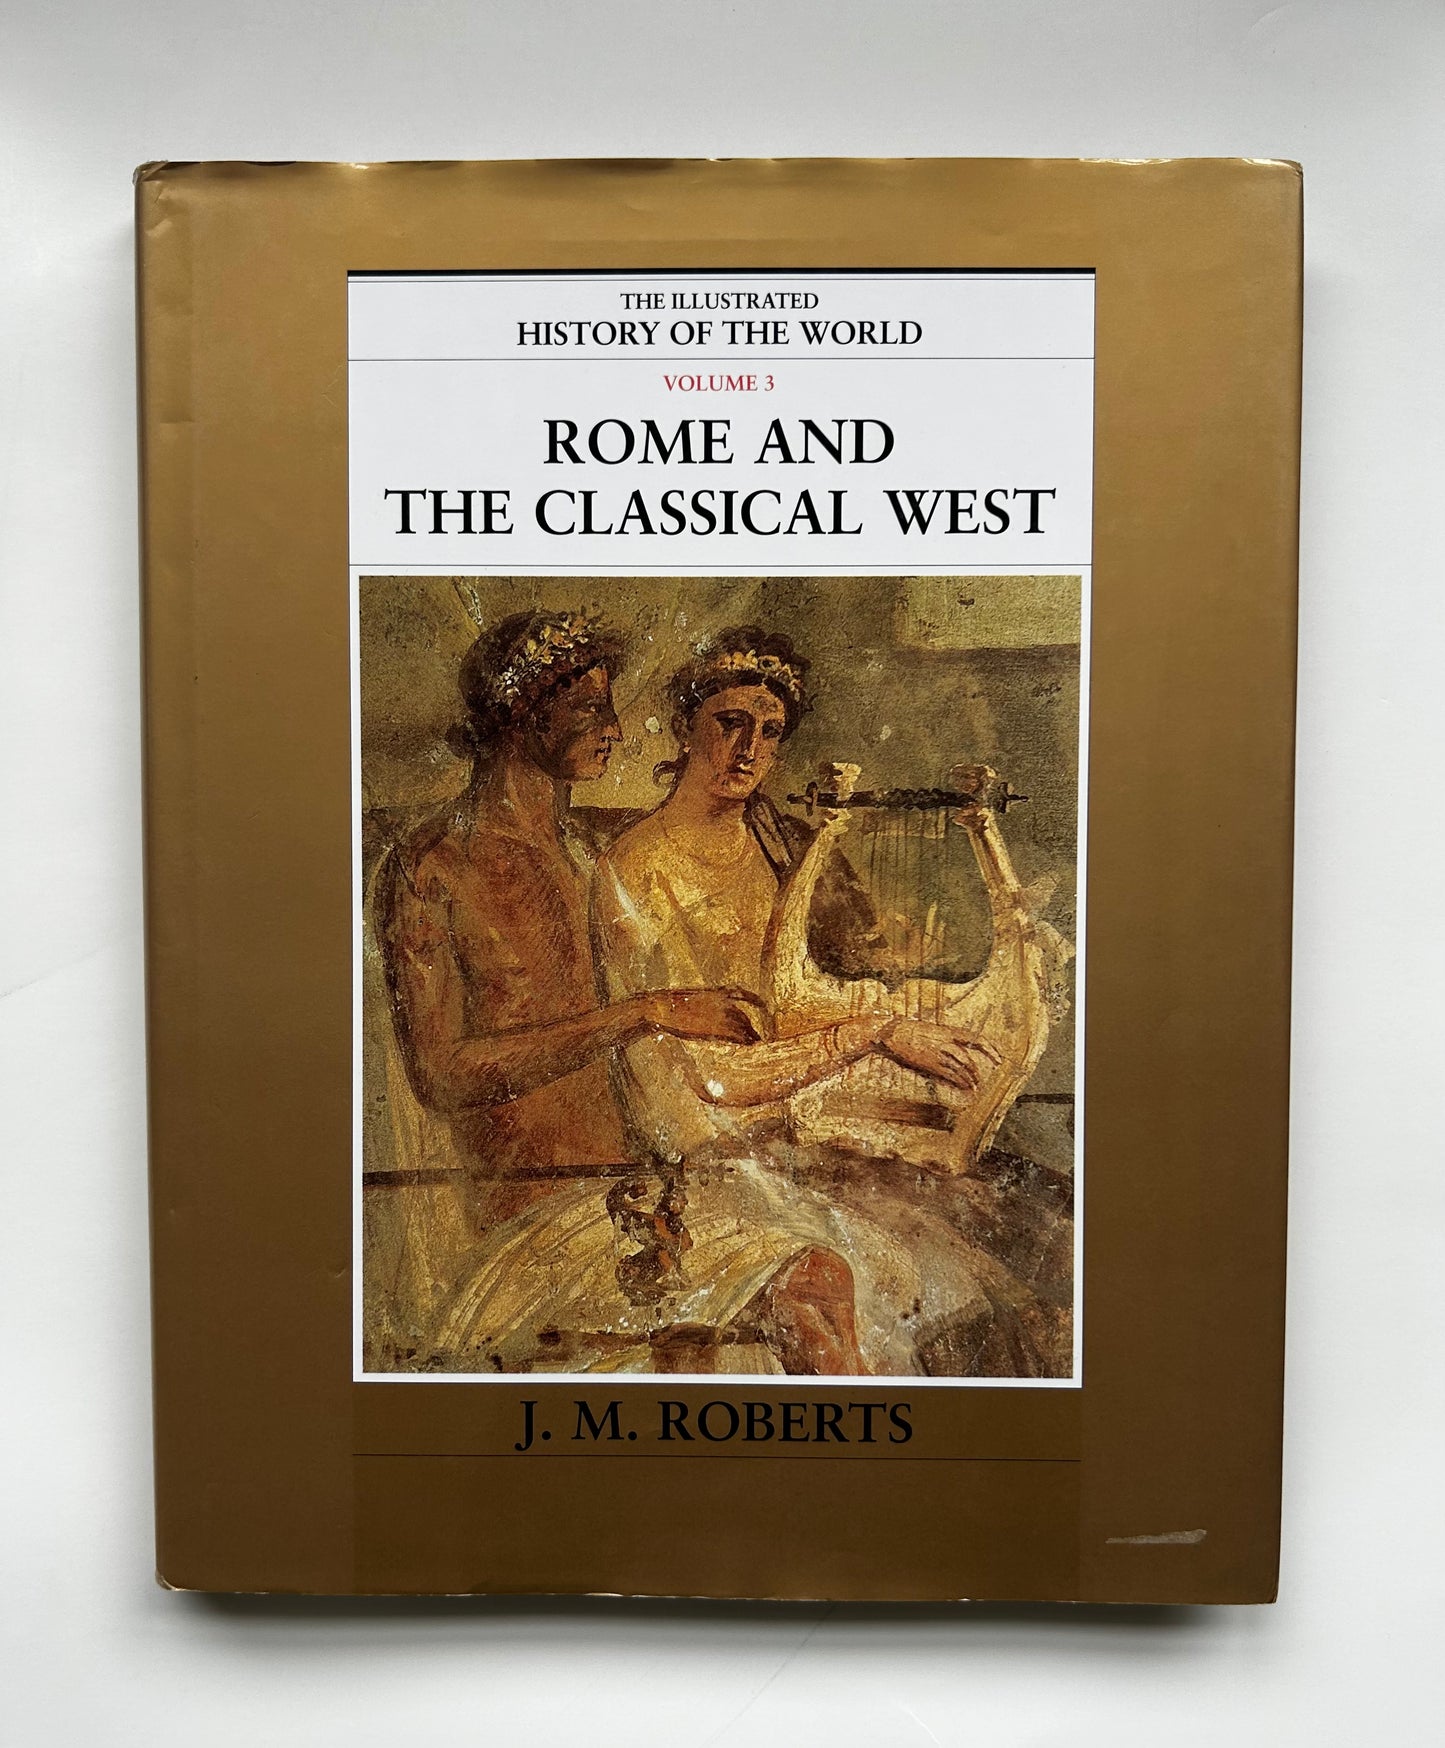 The Illustrated History of the World Volume 3: Rome and the Classical West